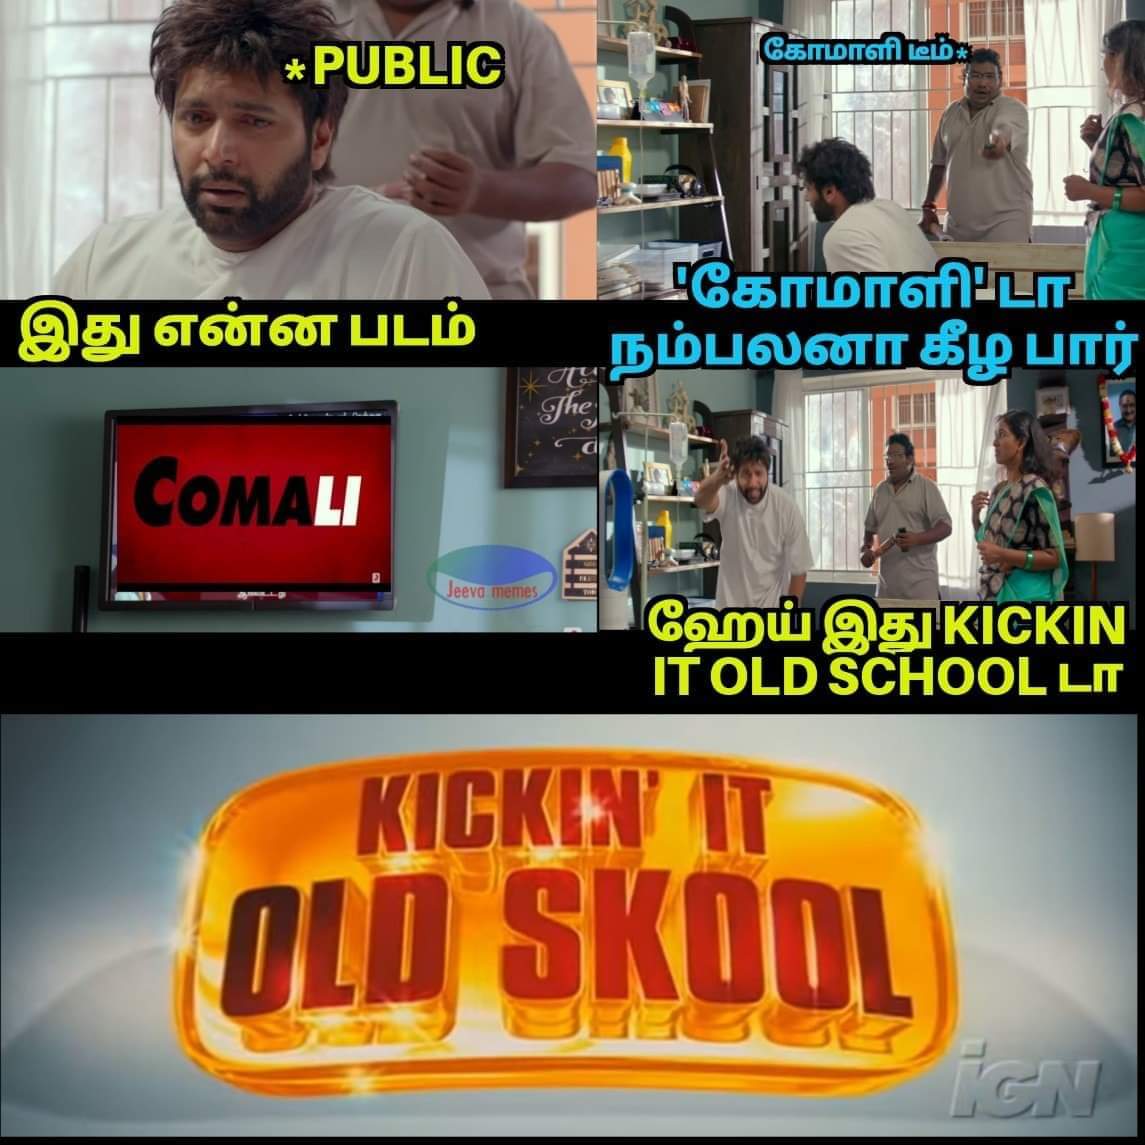 Did you know that #Comali is inspired remake of #KickinItOldSchool of 2007?.. So the director had to go 12 years behind in Coma to find a remake story & portray his own state legend's political entry in a wrong way to get the required attention for his film ?🤔#comaliNews7channel